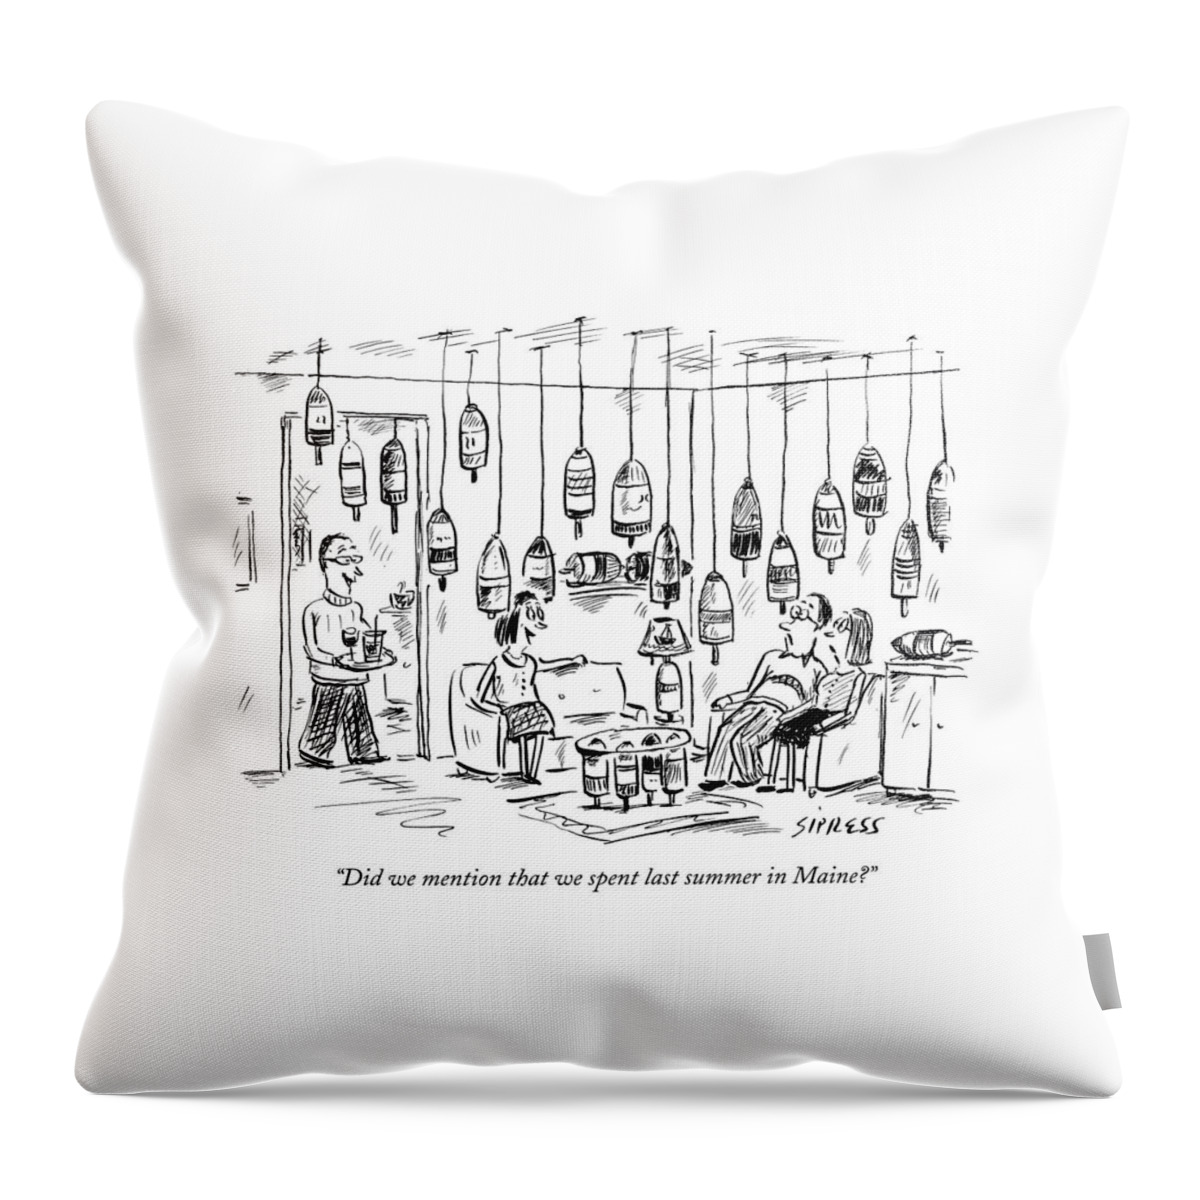 Did We Mention That We Spent Last Summer In Maine? Throw Pillow